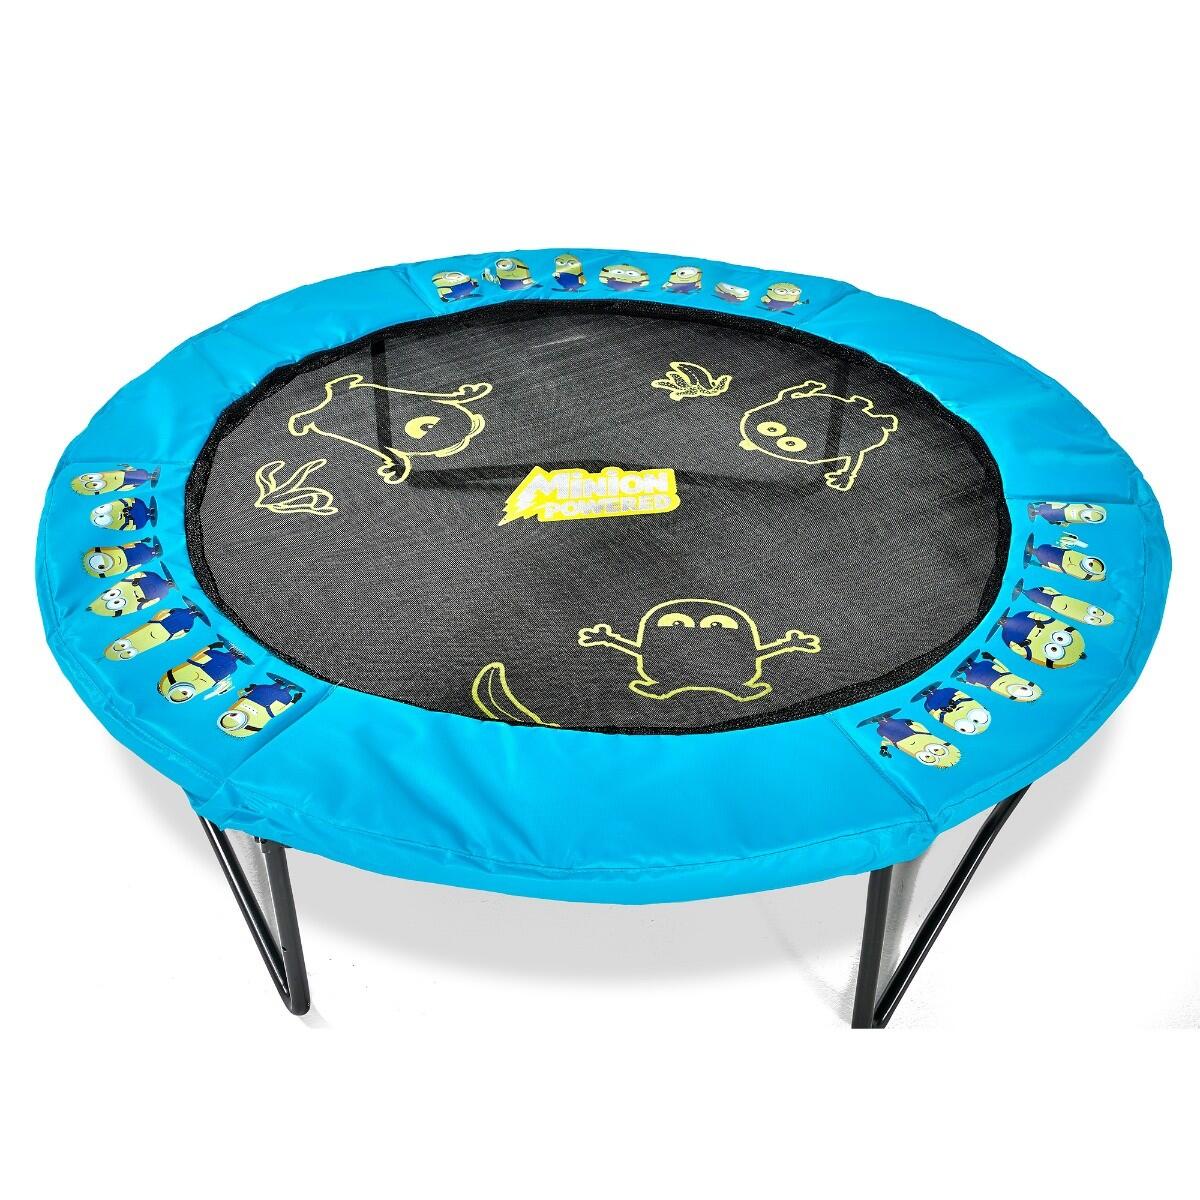 Plum Minions 4.5ft Minions Trampoline and Enclosure with Sounds 3/5